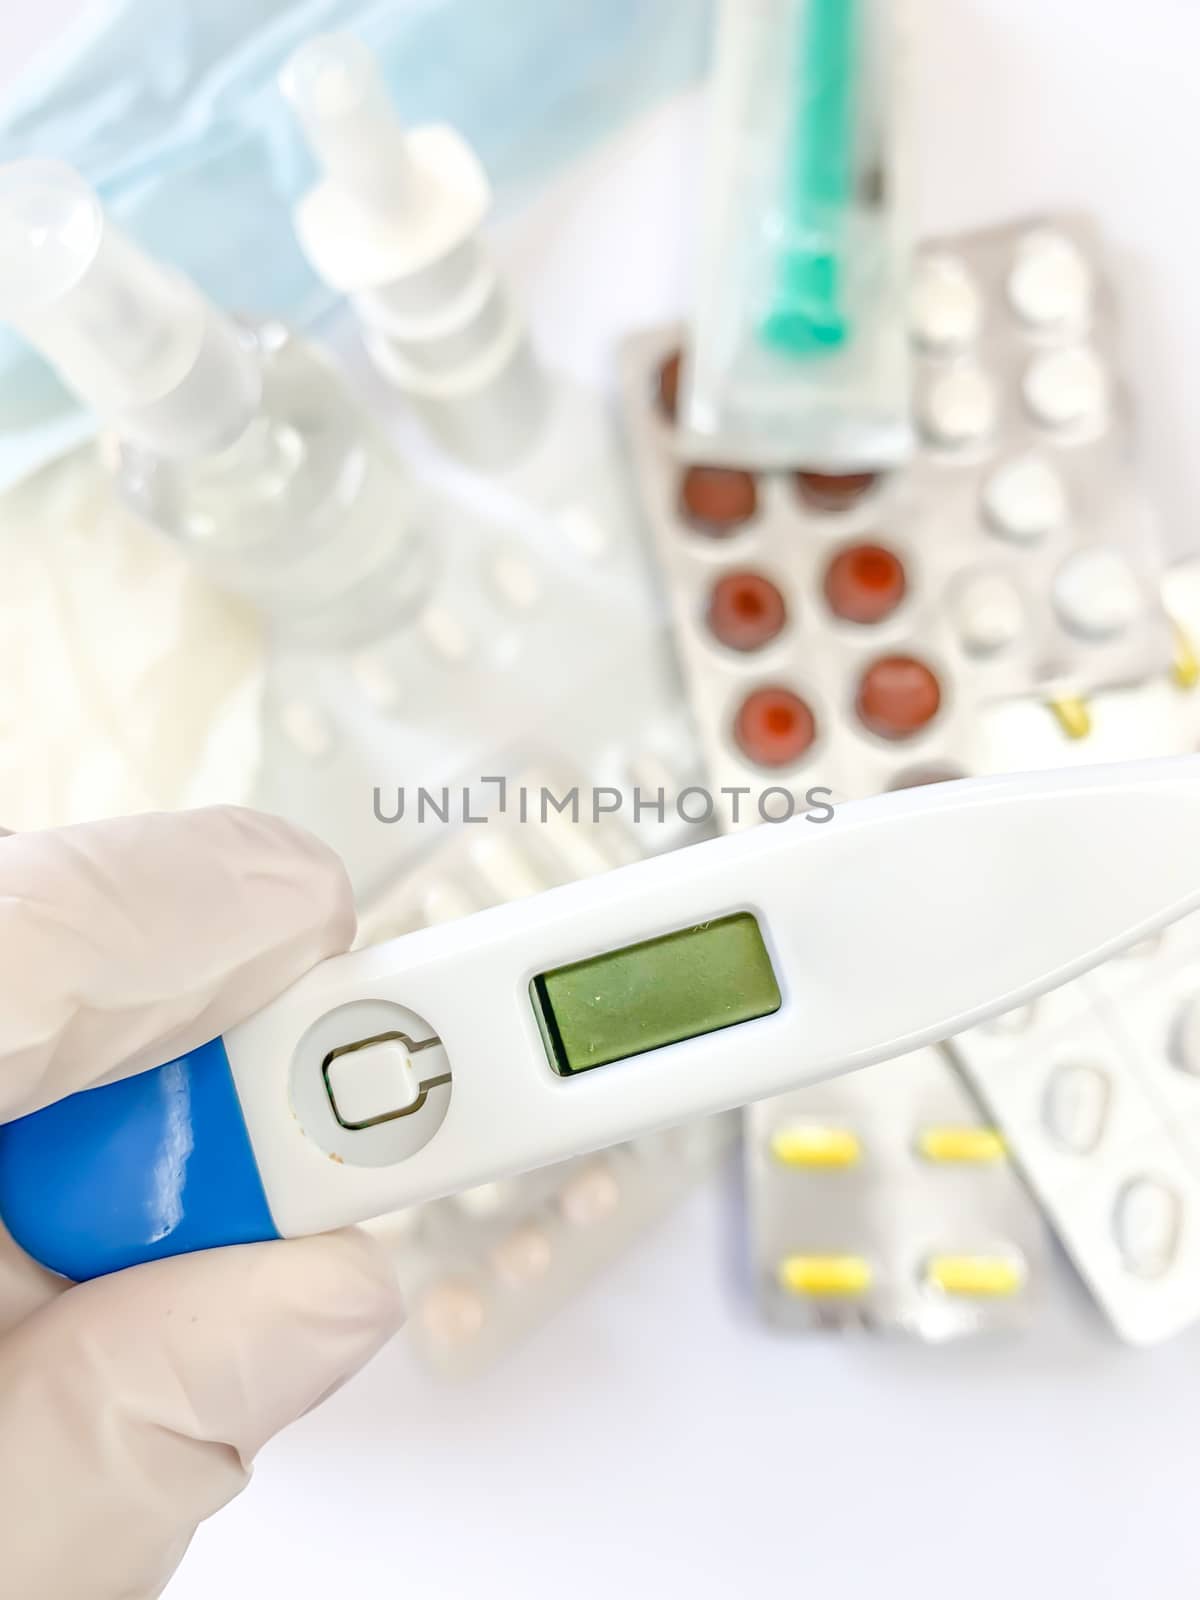 Digital thermometer for measuring body temperature in hand in glove of a woman on white background with many pills and medicines. Vertical image